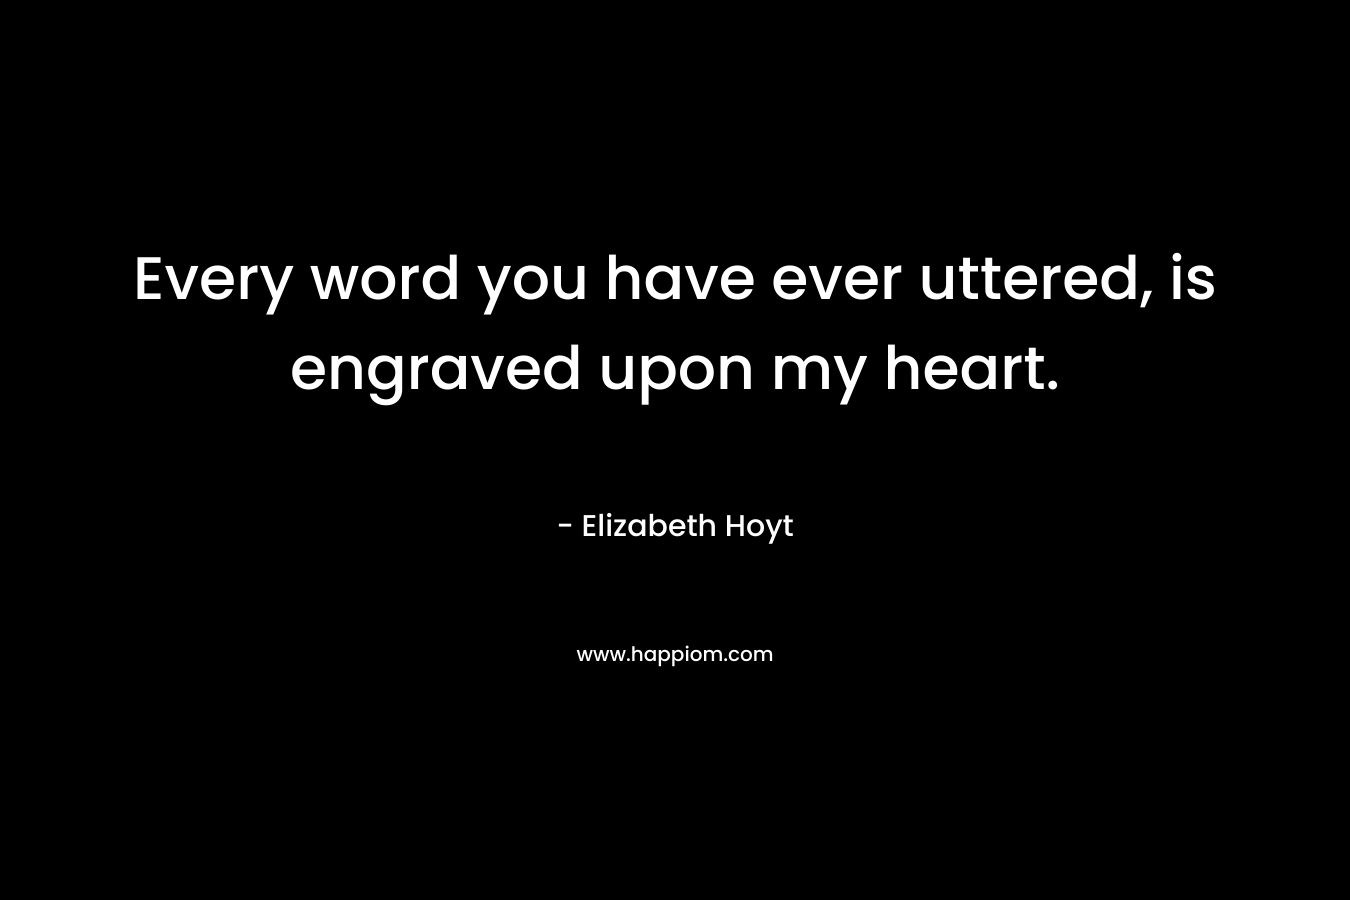 Every word you have ever uttered, is engraved upon my heart. – Elizabeth Hoyt